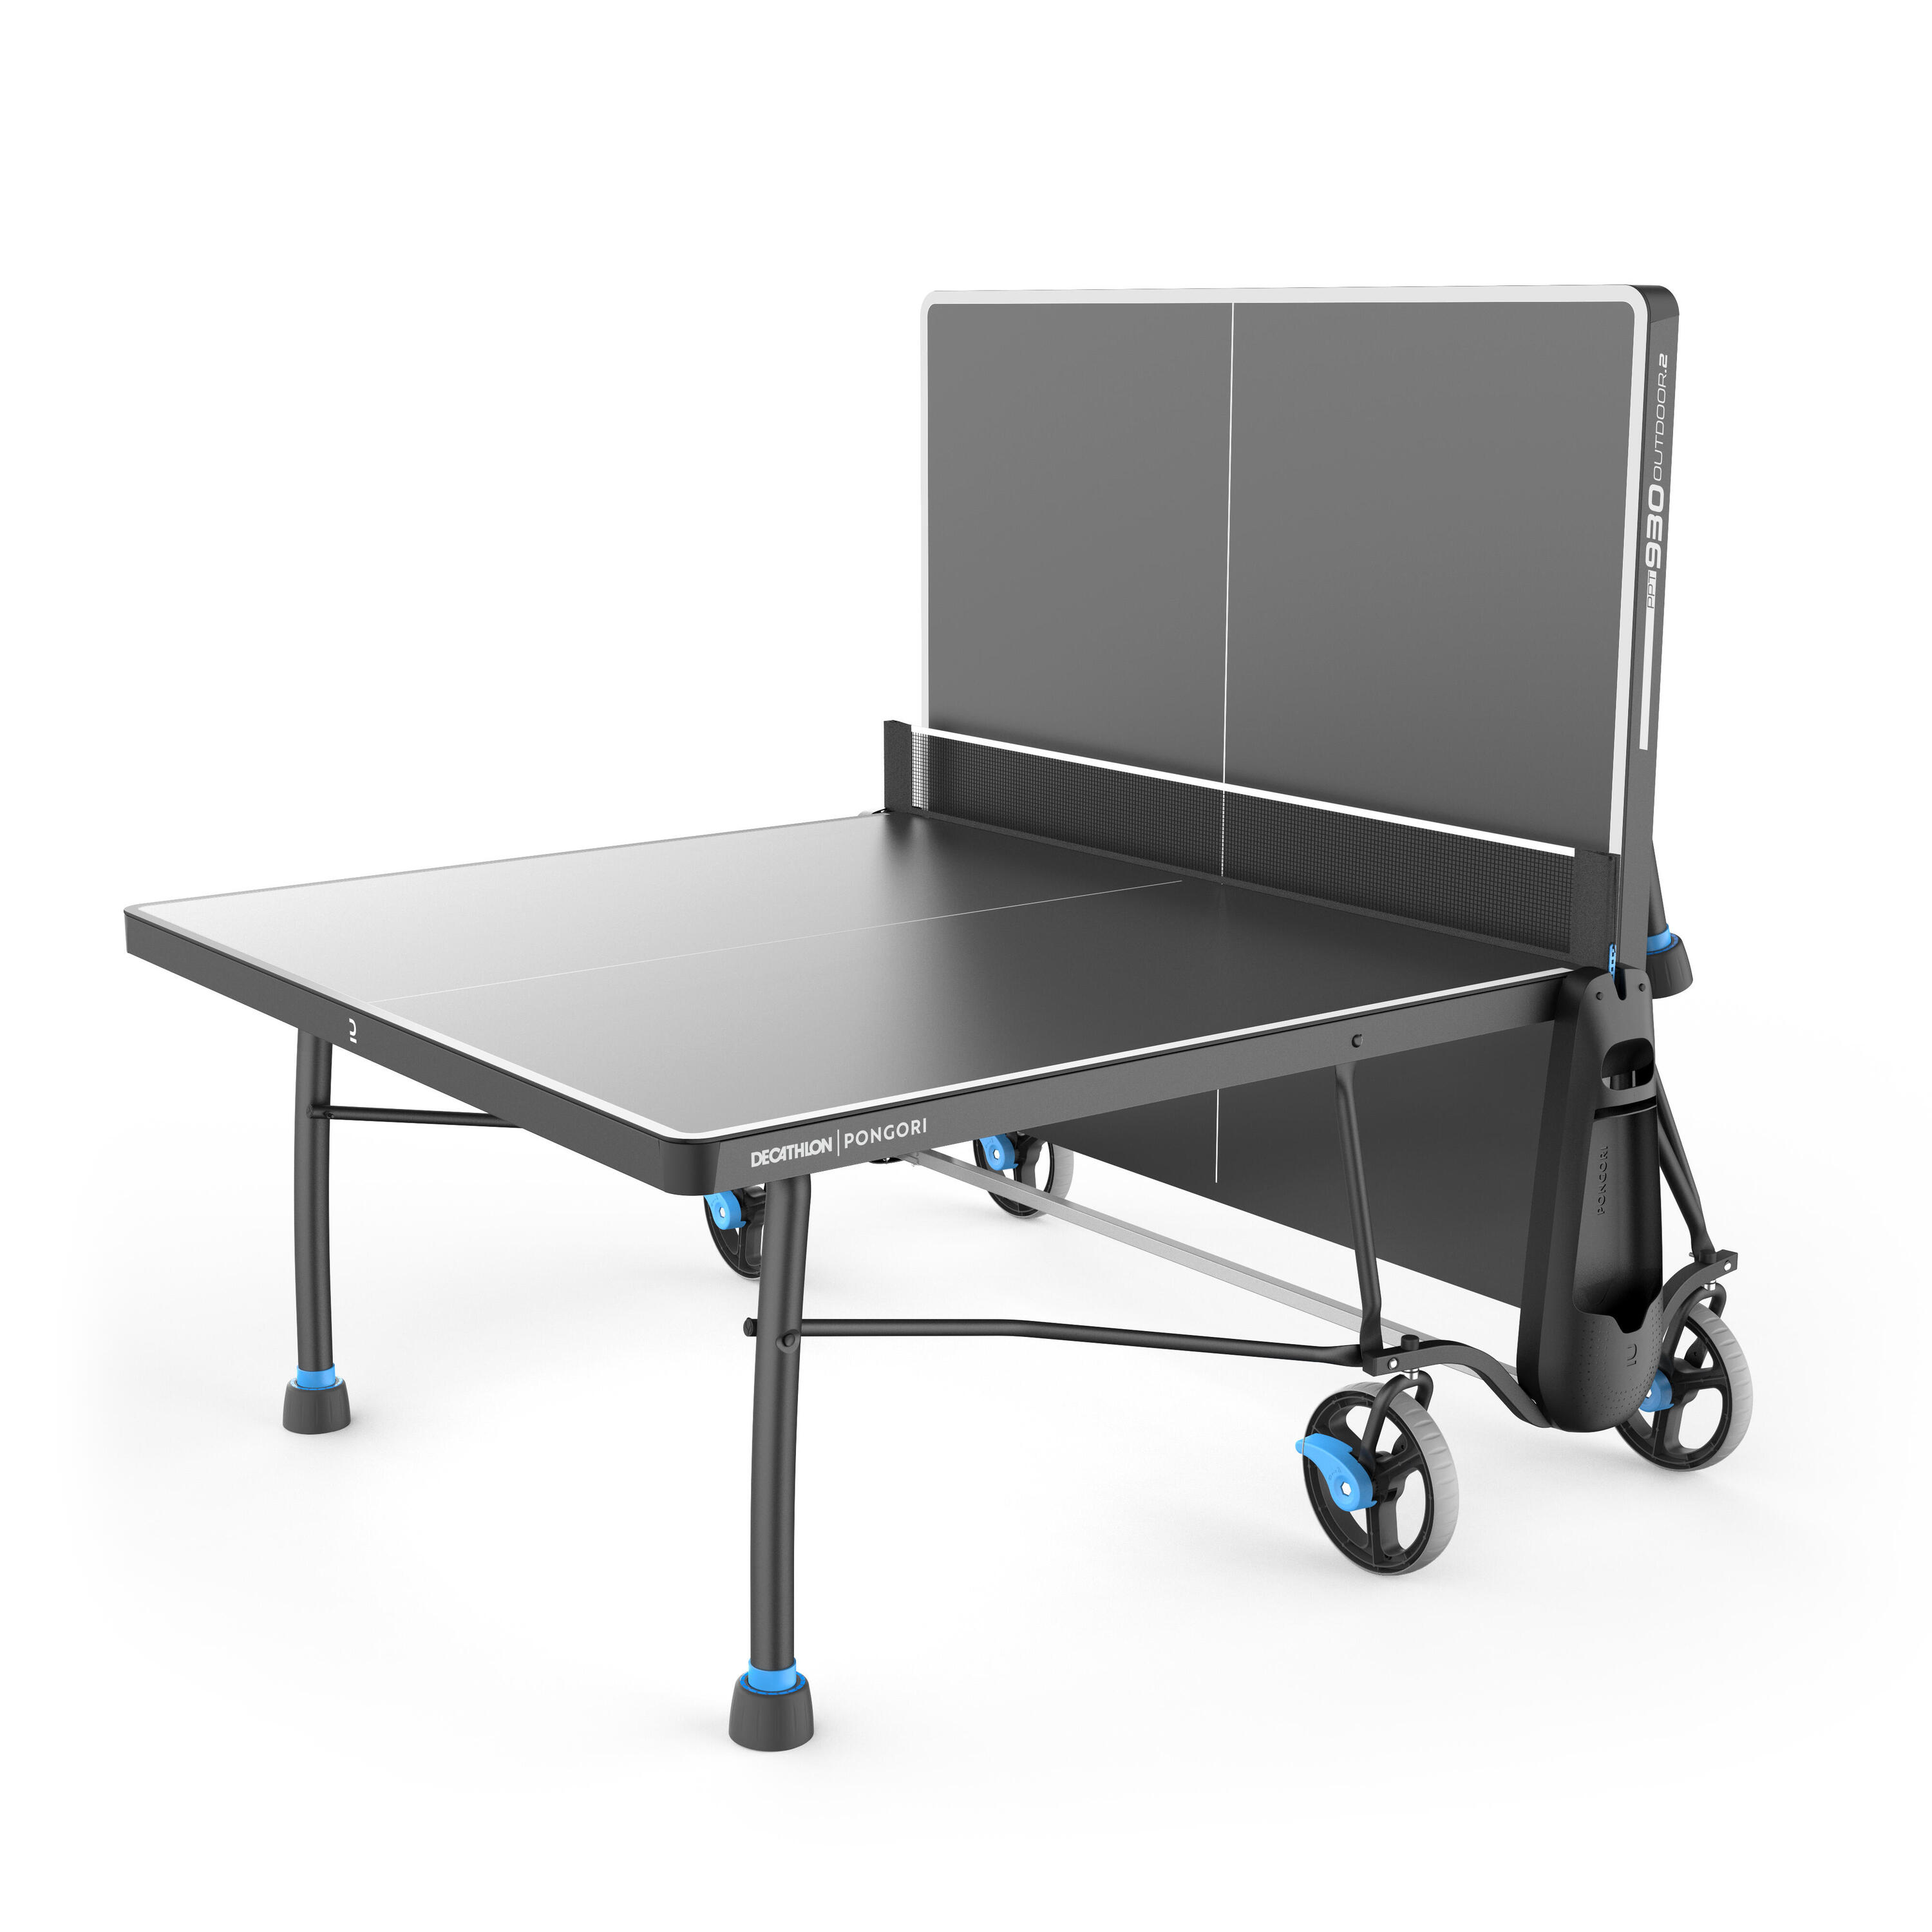 Outdoor Table Tennis Table PPT 930.2 With Cover - Black 3/16